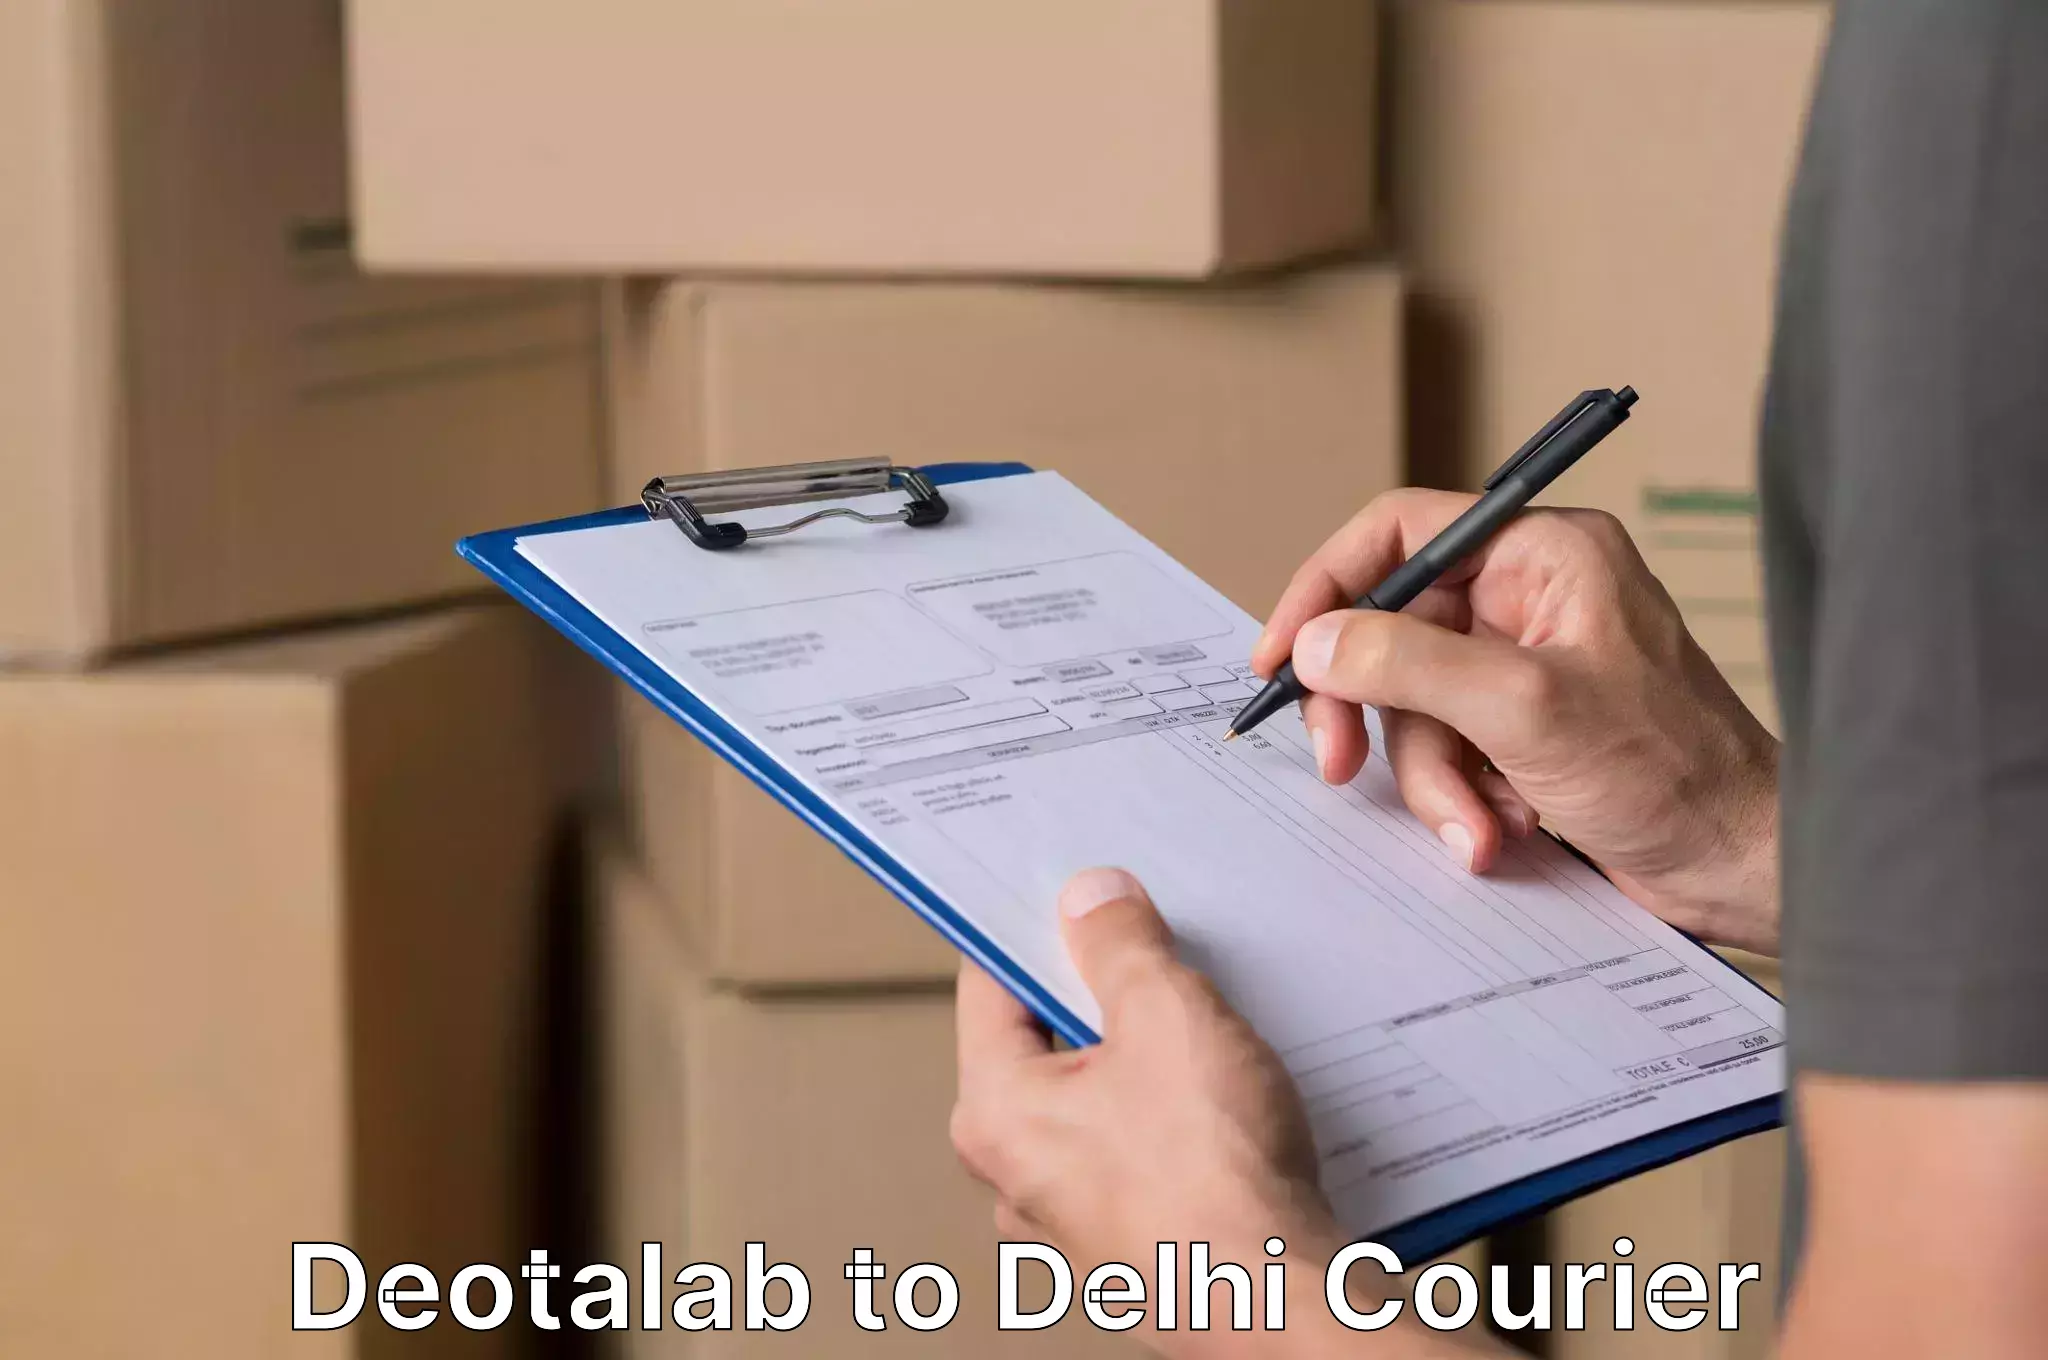 Furniture moving strategies Deotalab to Delhi